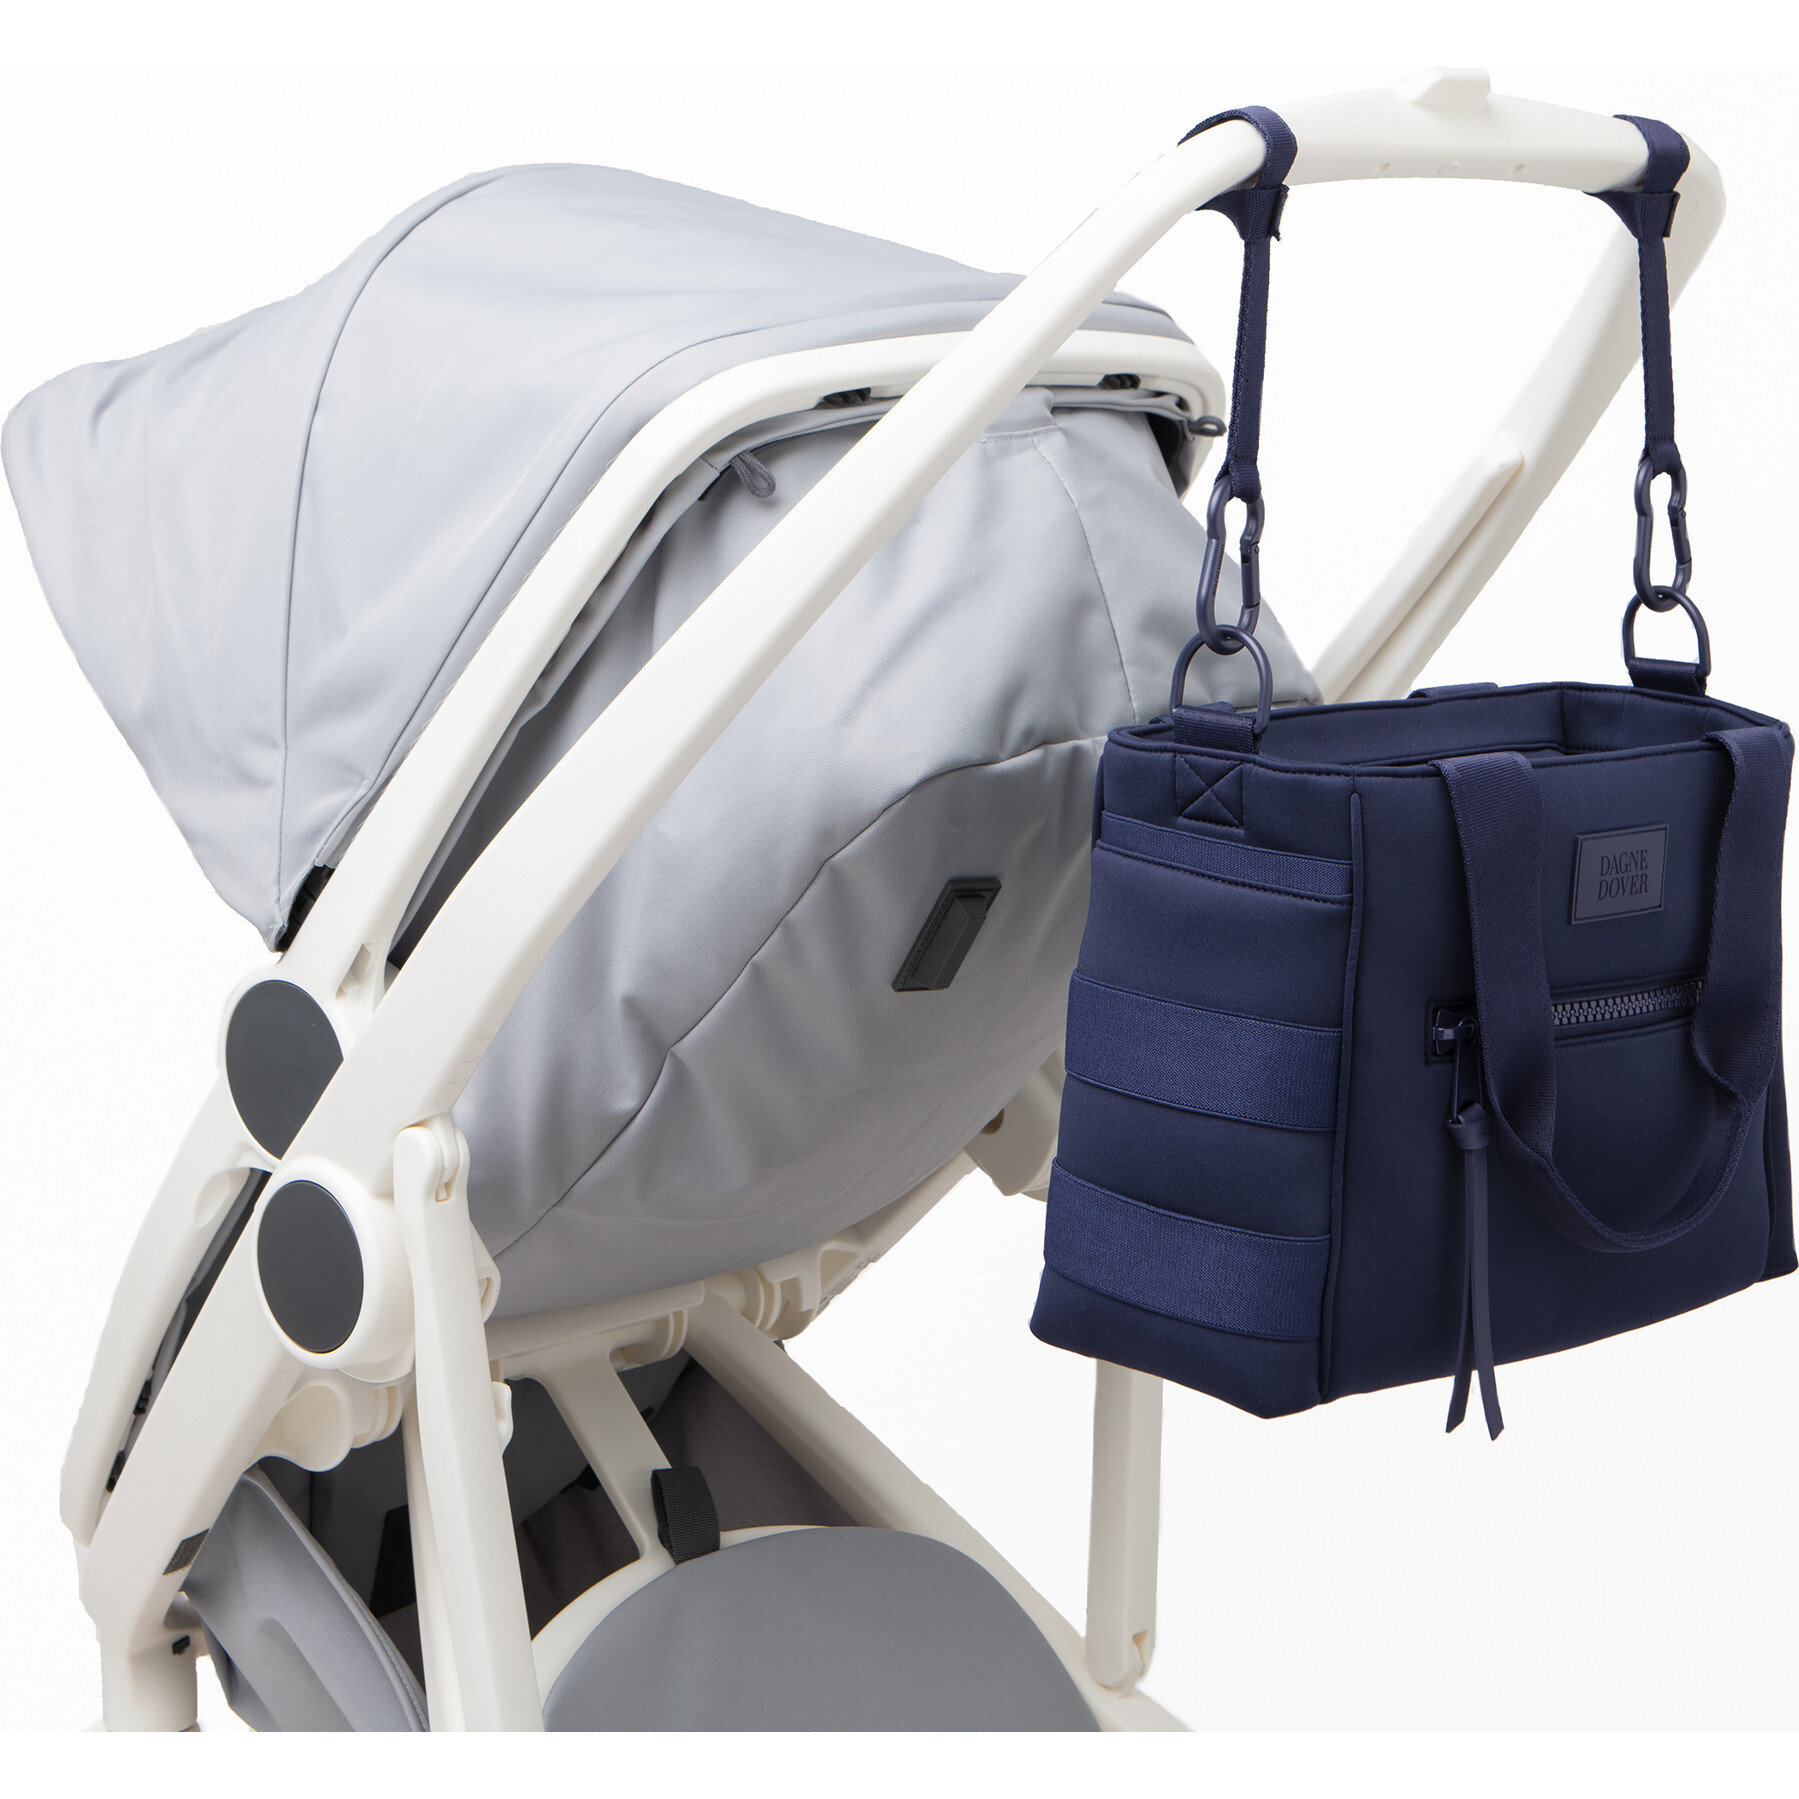 Dagne Dover Large Wade Diaper Tote